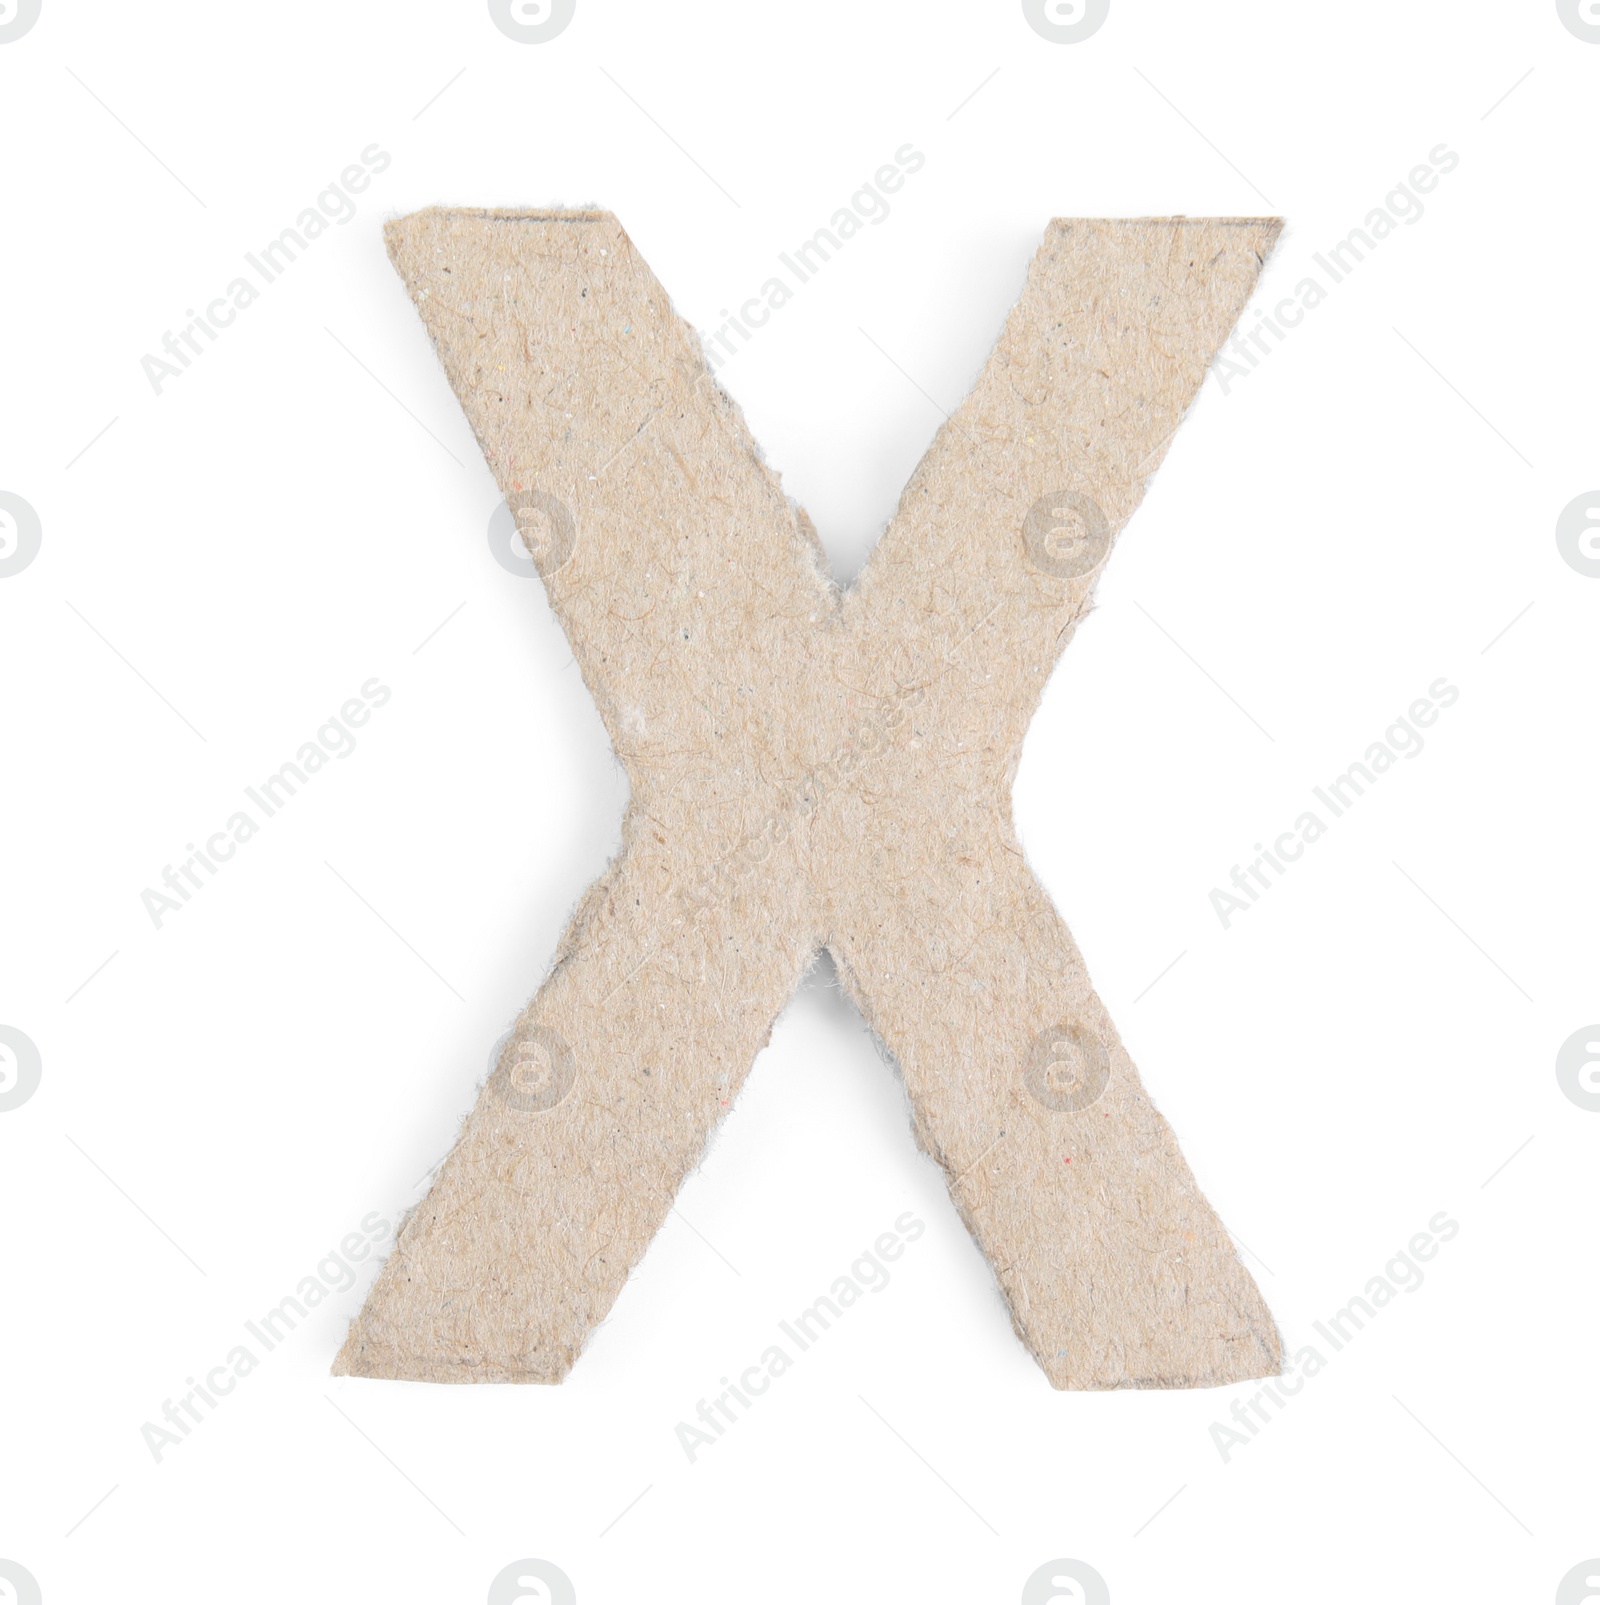 Photo of Letter X made of cardboard isolated on white